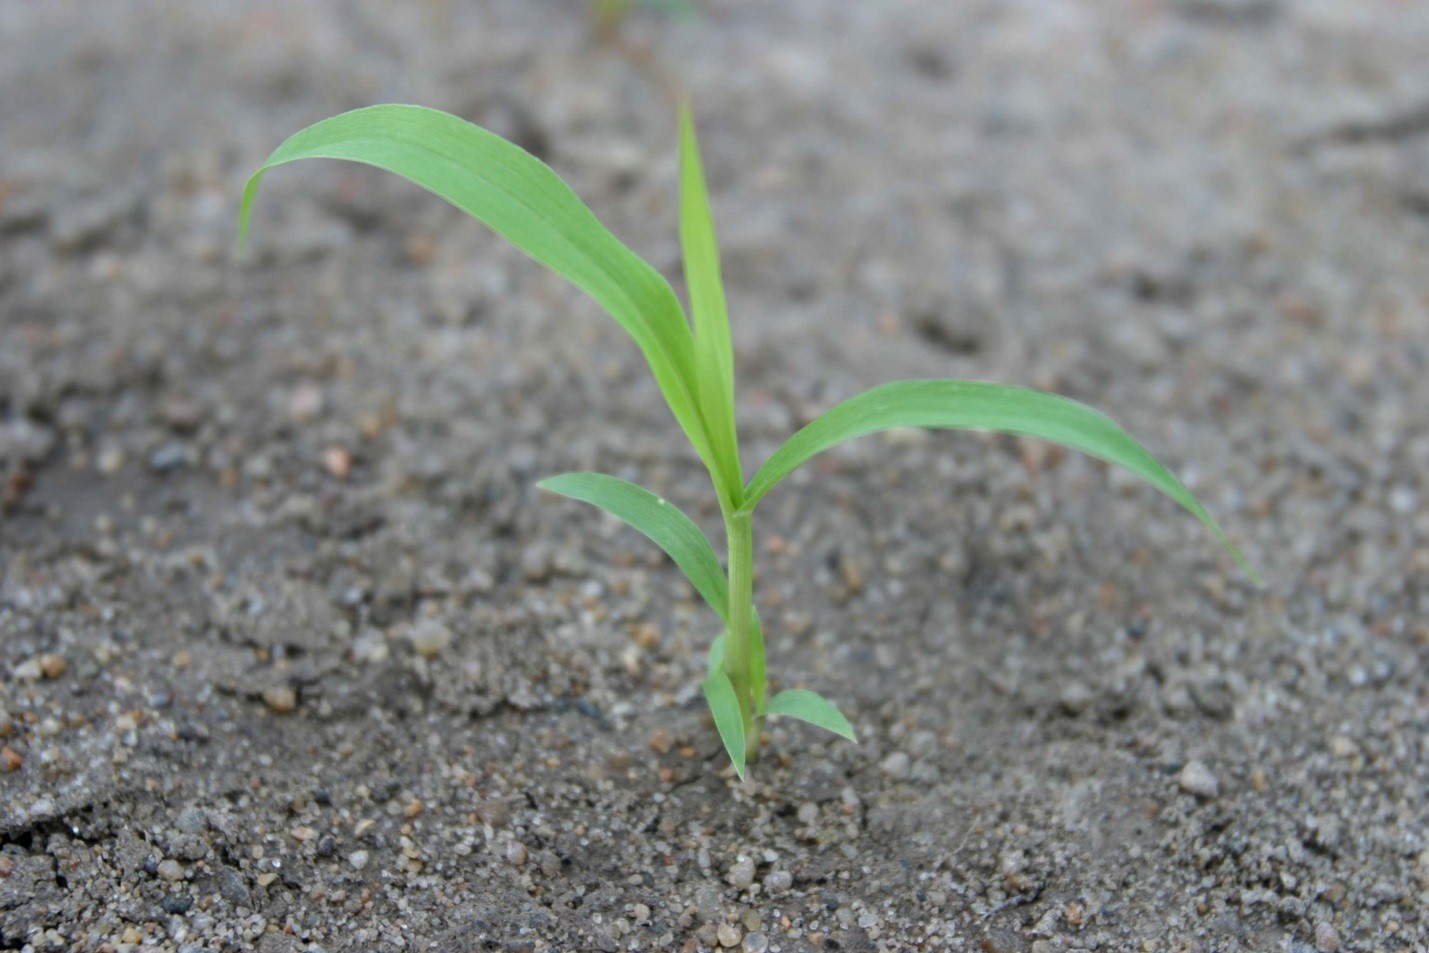 Figure 4. Foxtail seedlings, like the one pictured, are emerging in fields throughout Missouri.